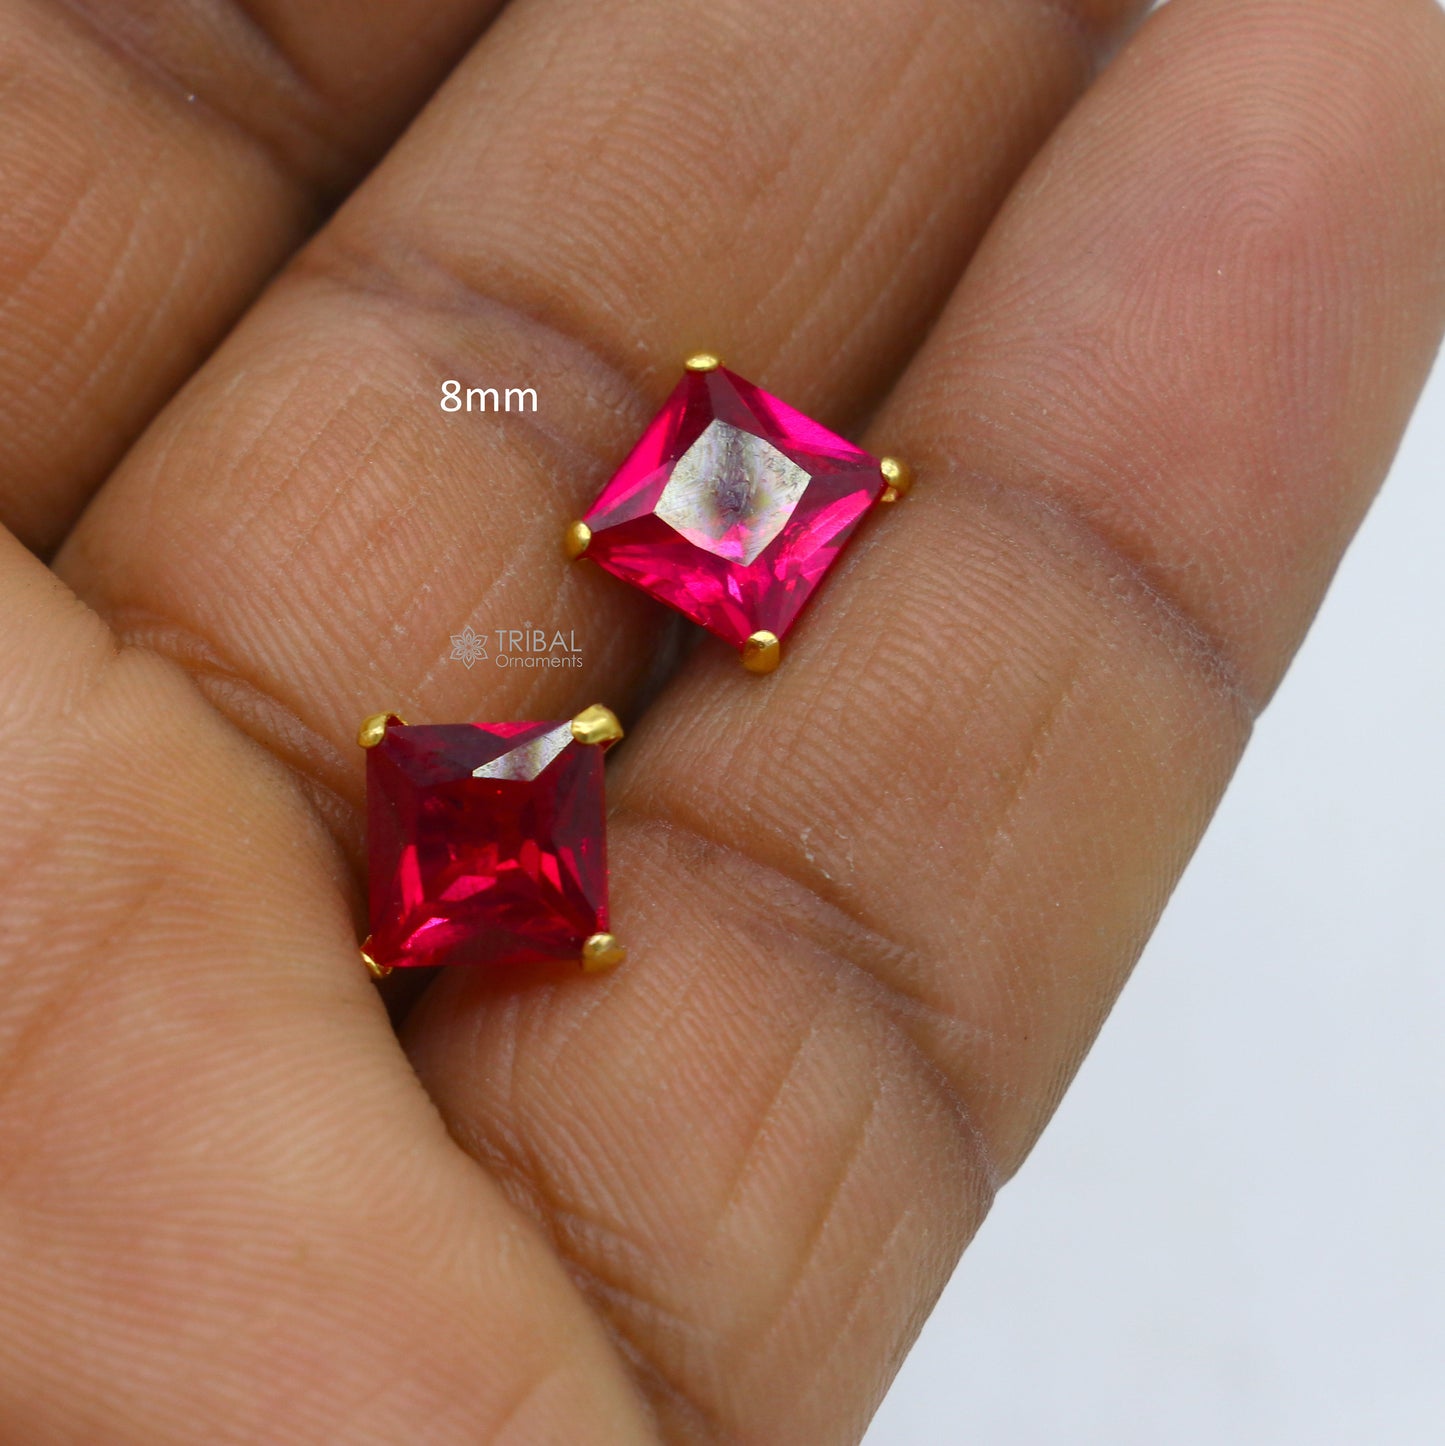 Exclusive 14kt yellow gold handmade single red stone square shape stud earring cartilage customized unisex jewelry er181 - TRIBAL ORNAMENTS